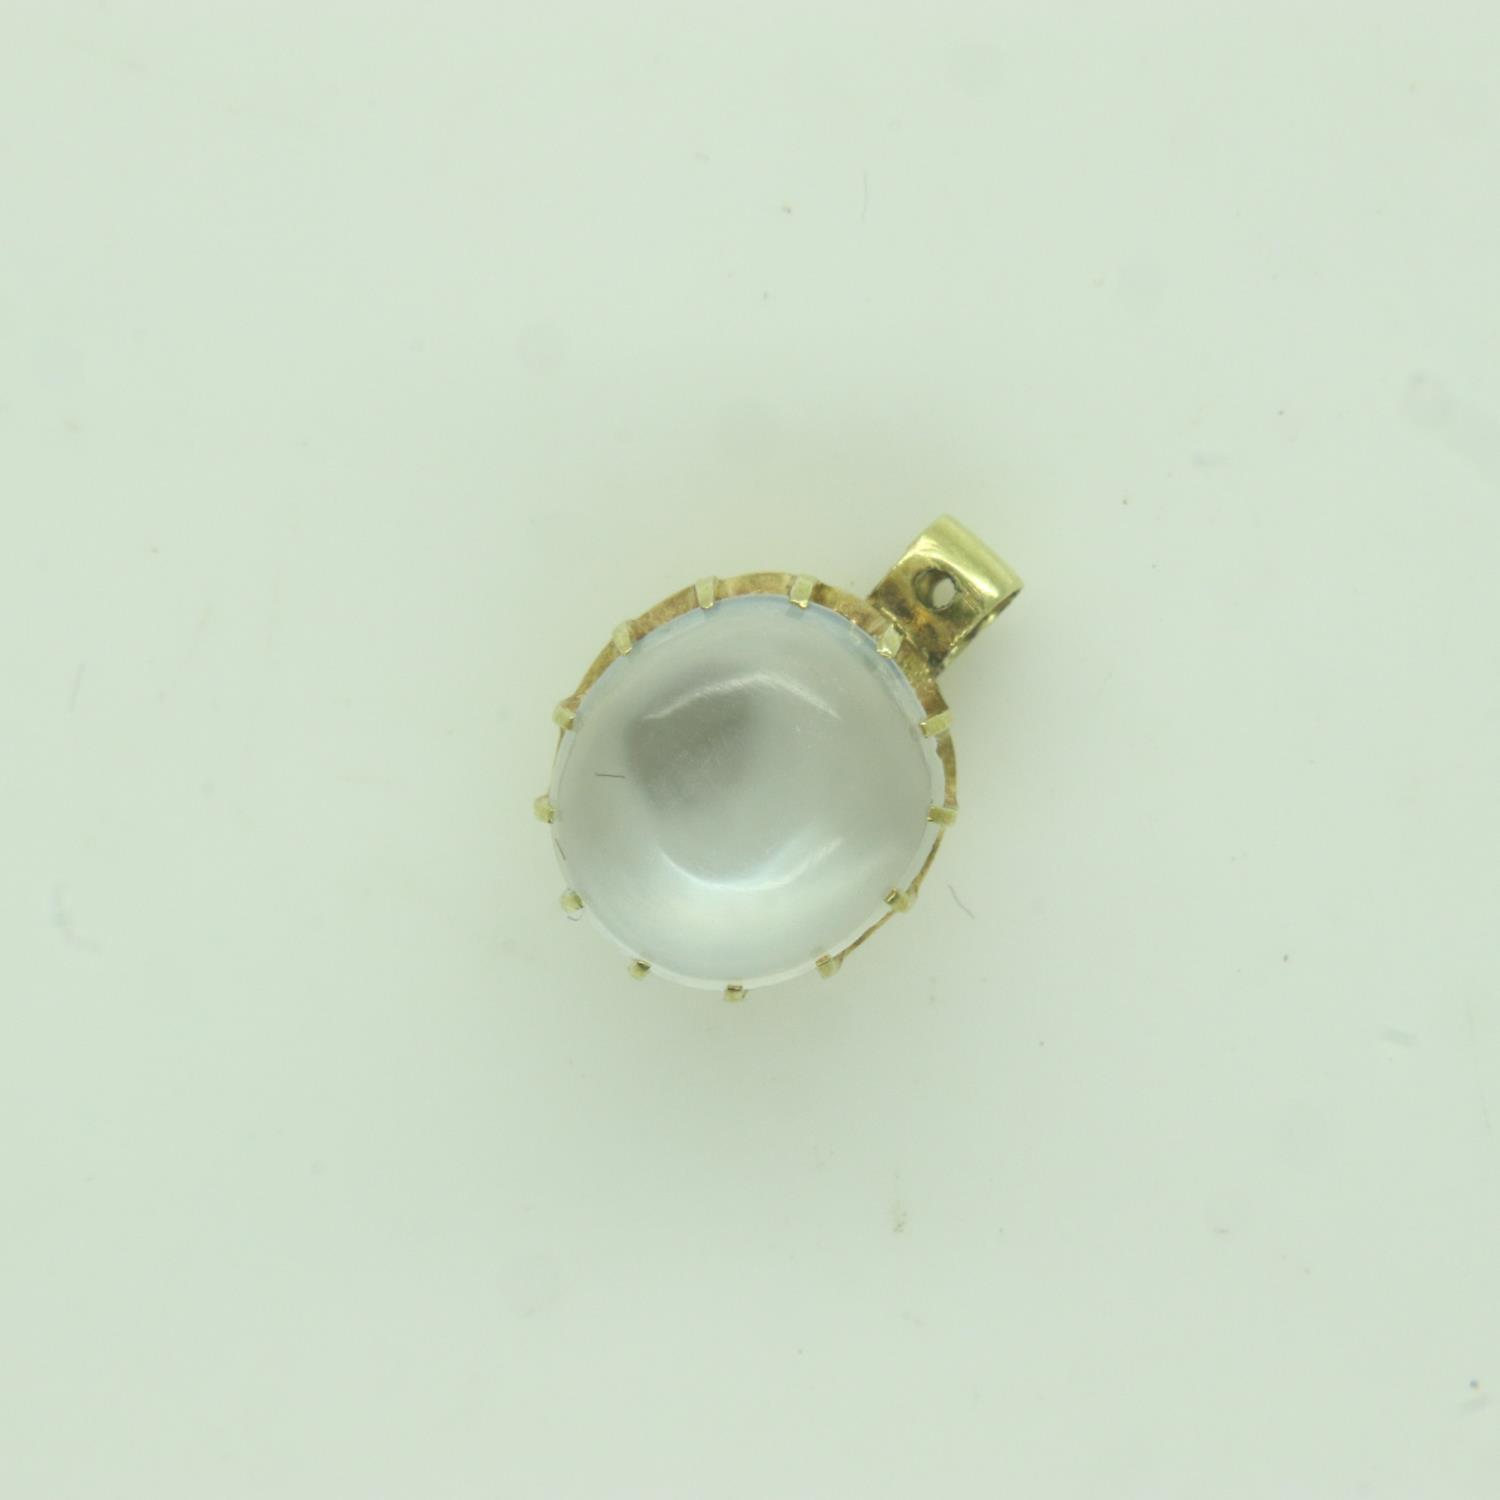 Unmarked 18ct gold moonstone cabochon pendant, 0.4g. UK P&P Group 0 (£6+VAT for the first lot and £